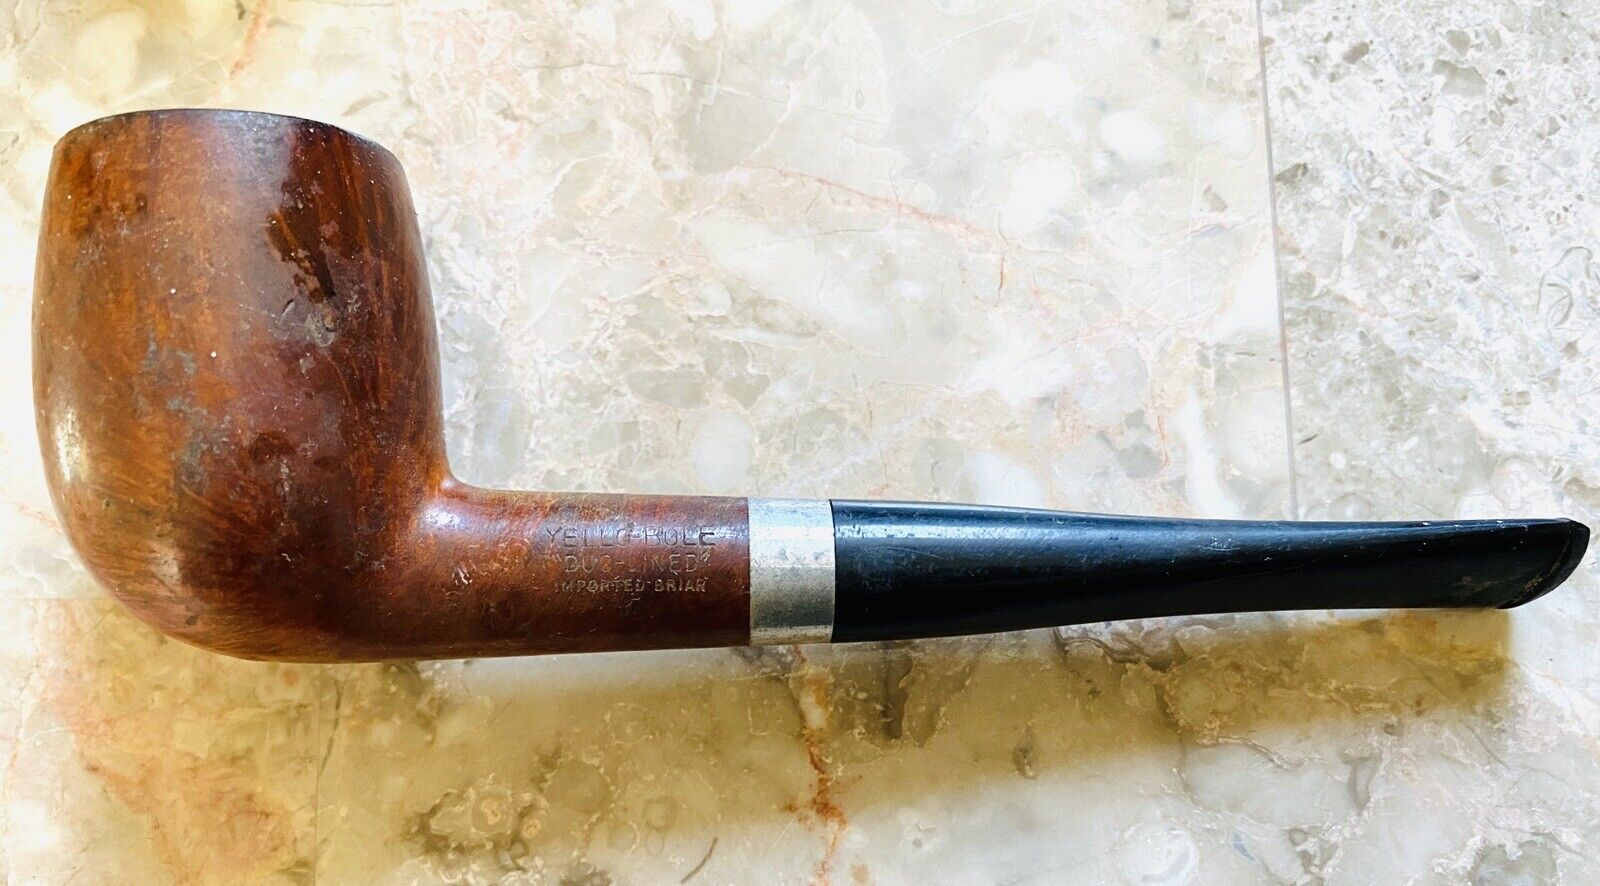 YelloBole Duo-Lined Imported Briar Smoking Pipe 5.5 Inch Long